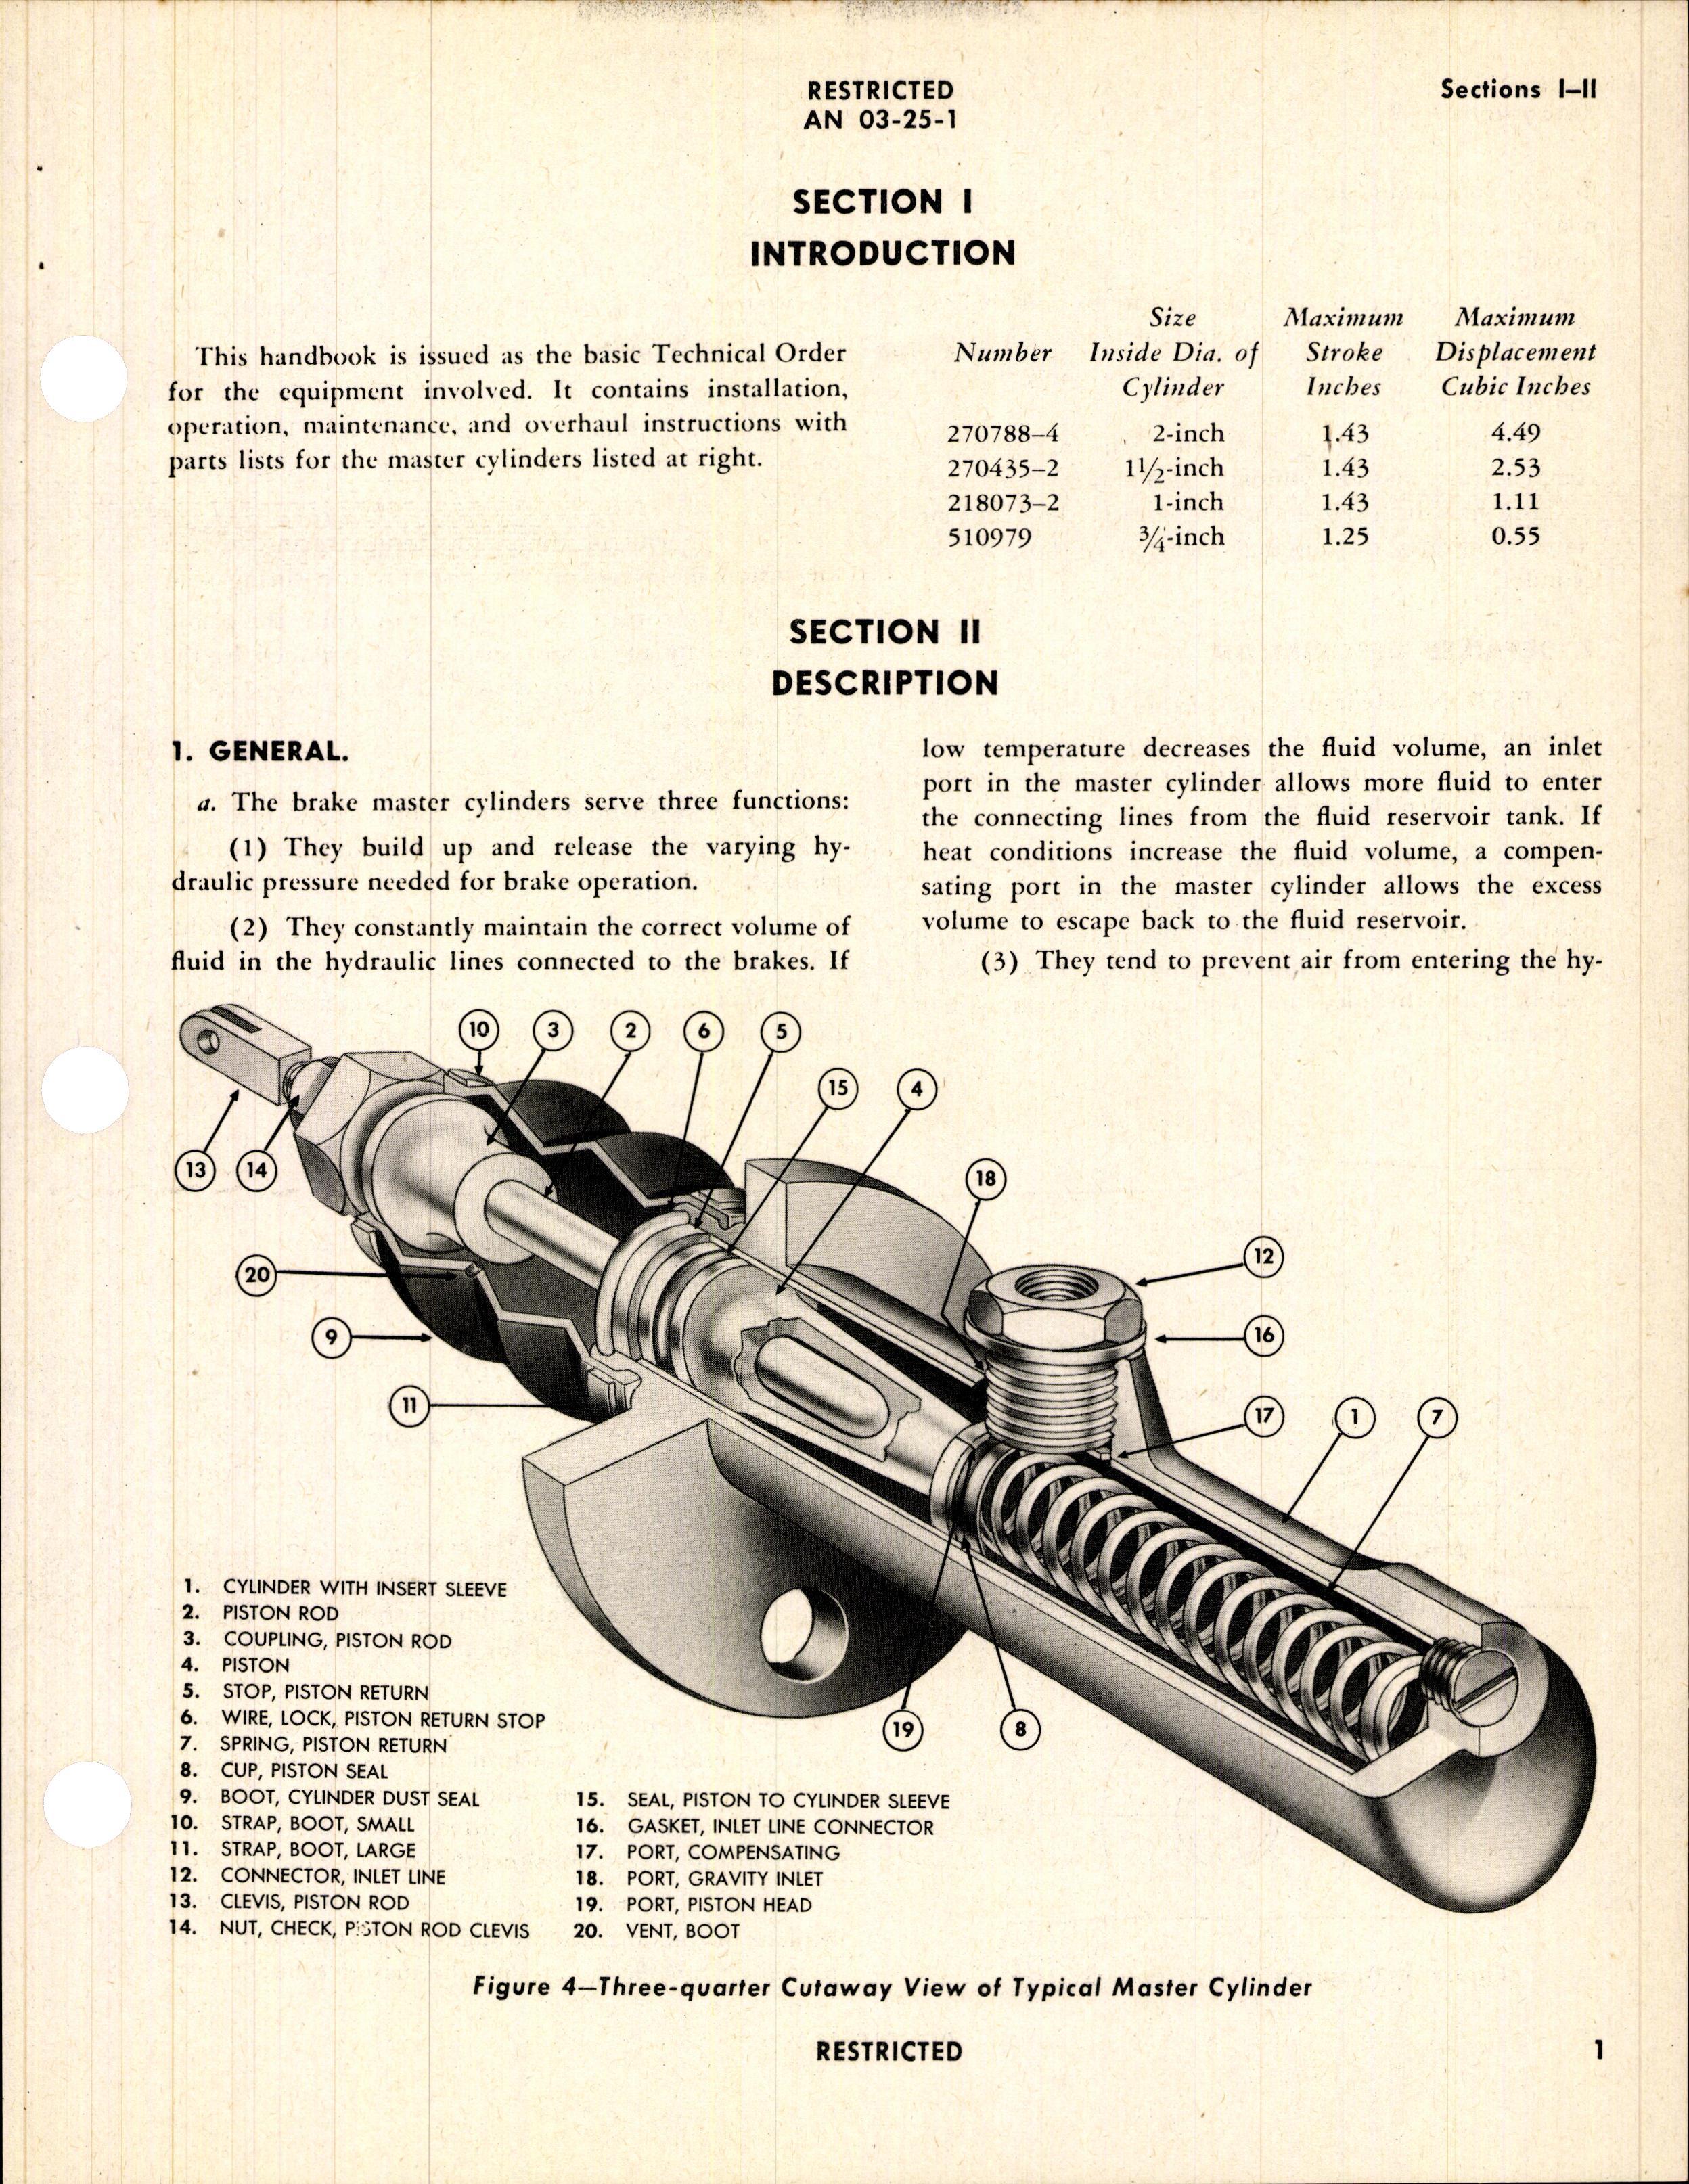 Sample page 5 from AirCorps Library document: Handbook of Instructions with Parts Catalog for Goodyear Master Brake Cylinders